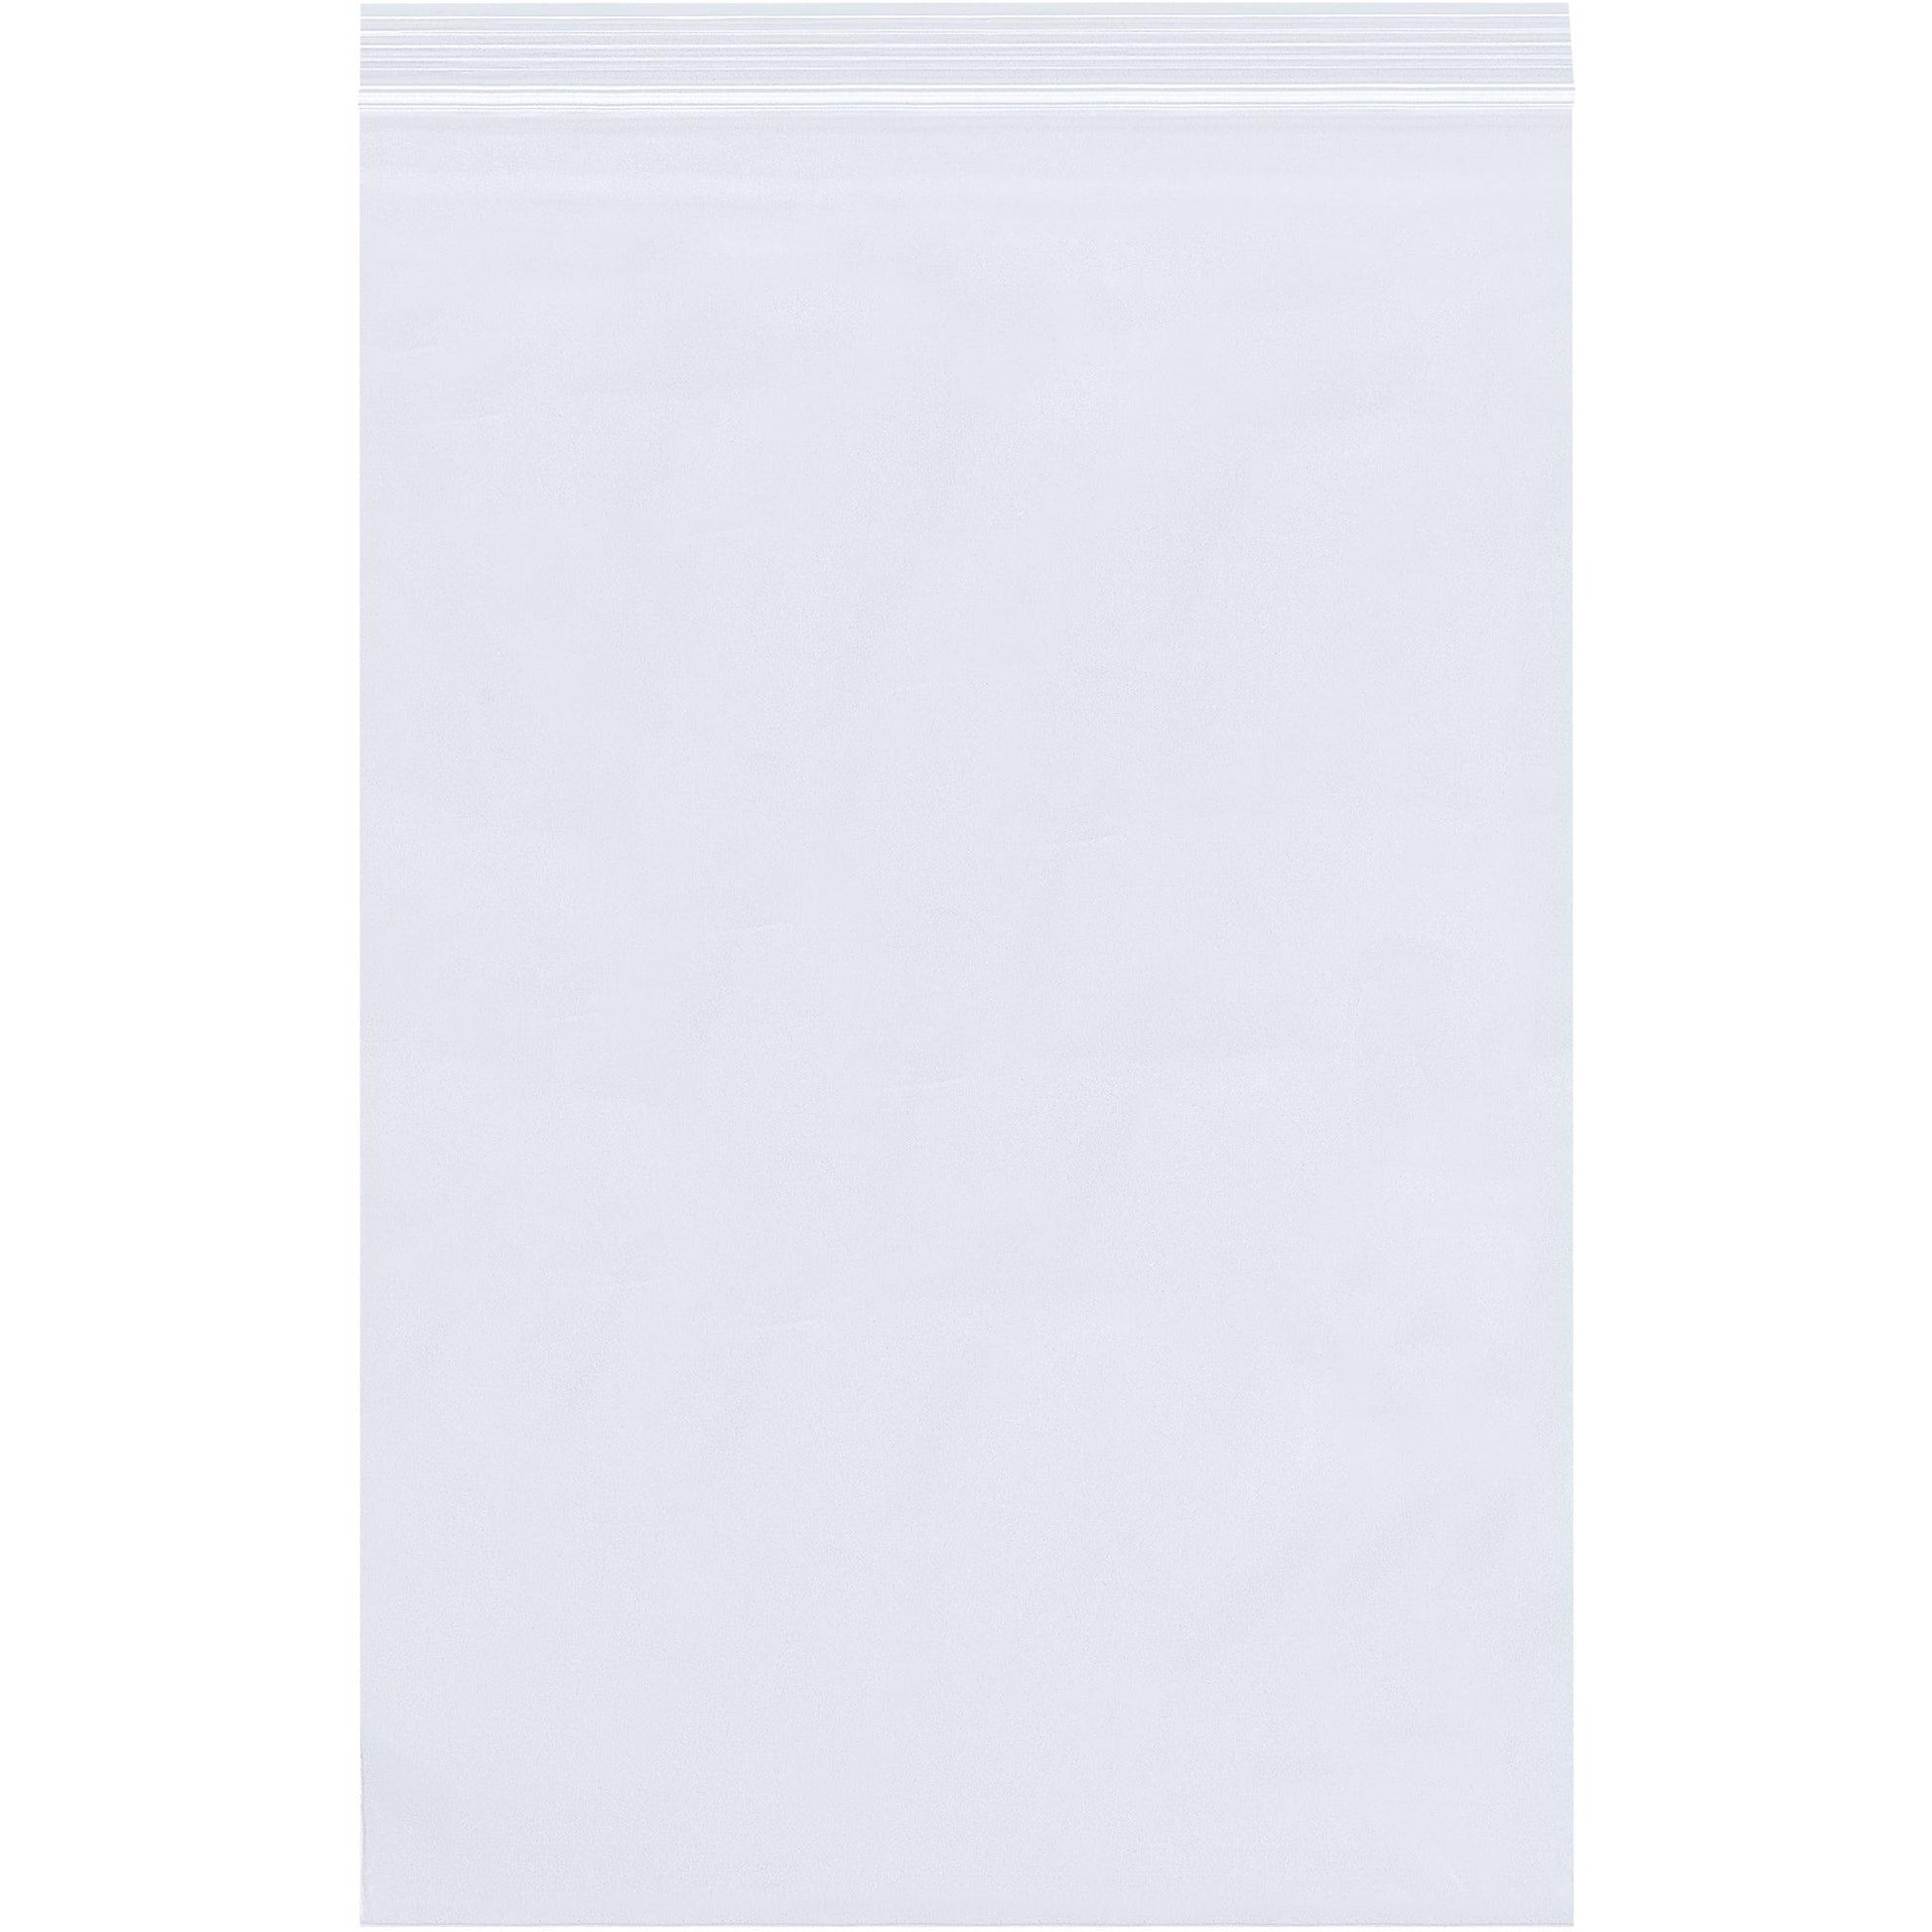 10 x 13" - 2 Mil Reclosable Poly Bags - PB3660